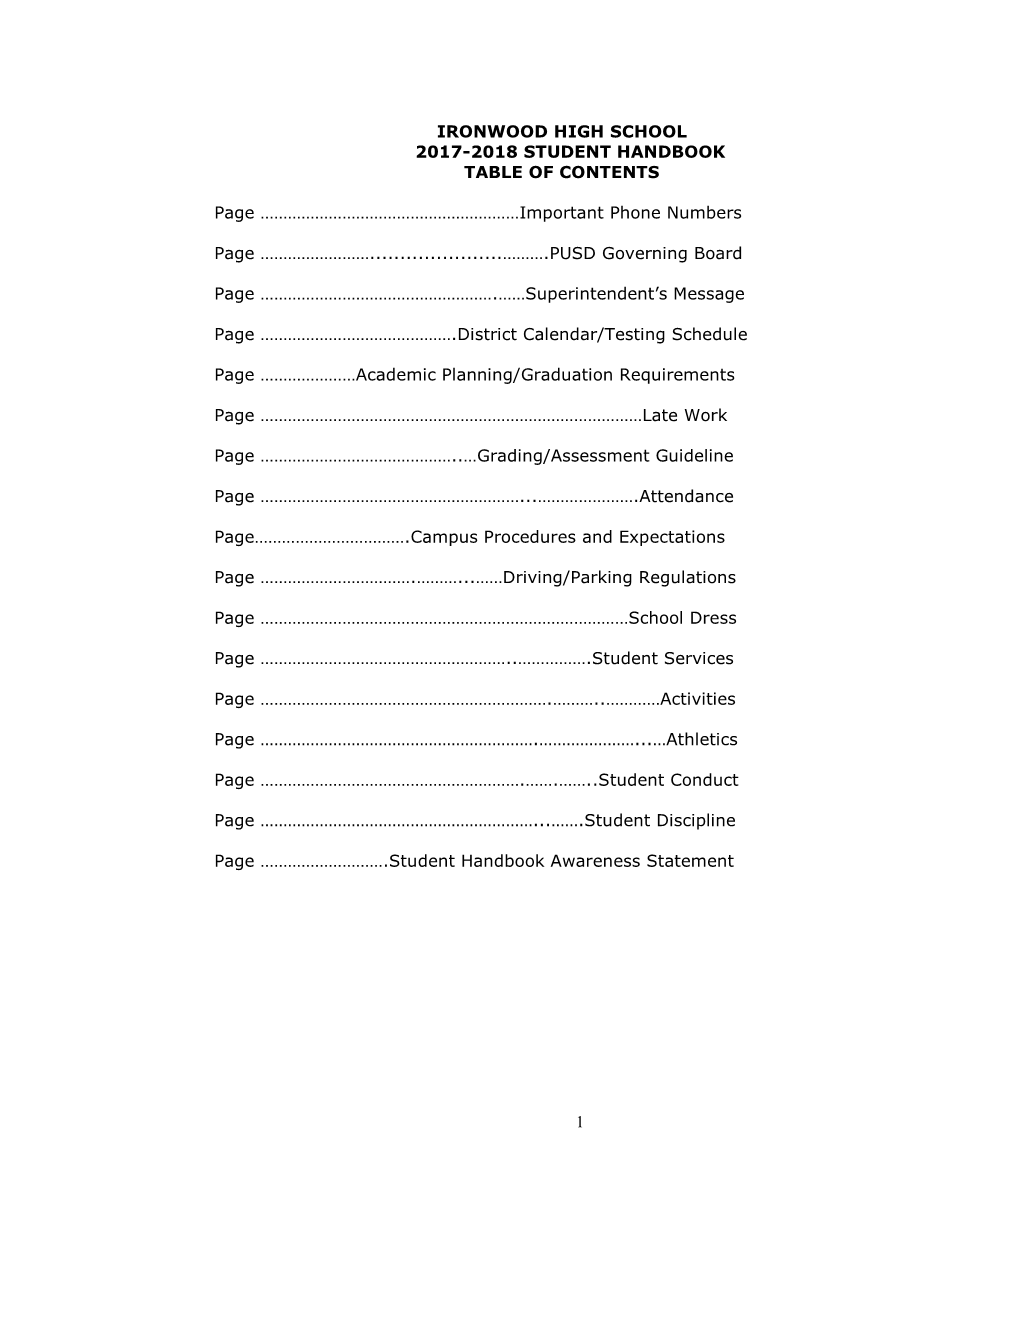 1 IRONWOOD HIGH SCHOOL 2017-2018 STUDENT HANDBOOK TABLE of CONTENTS Page ………………………………………………